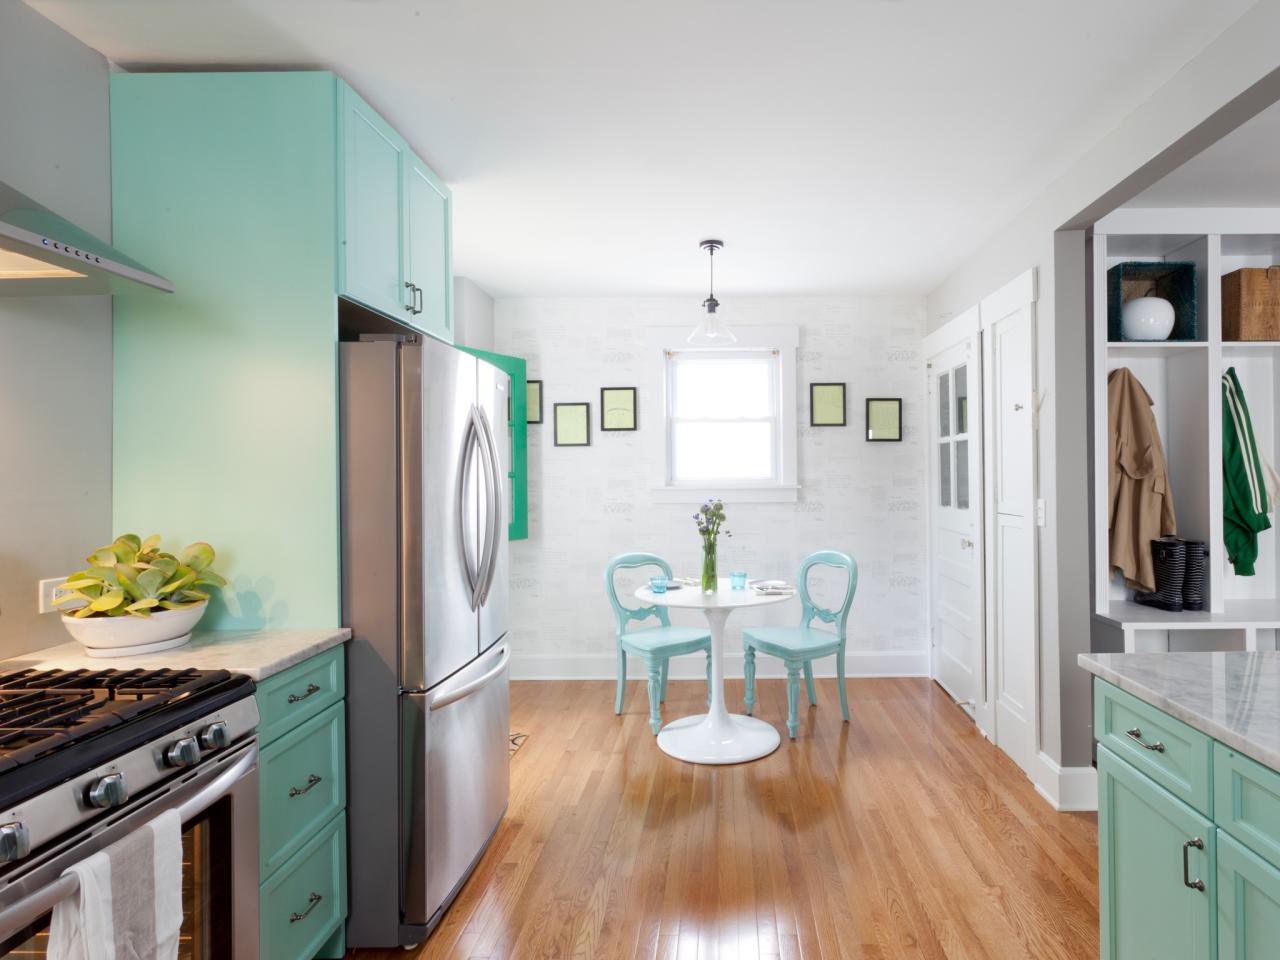 Robin's Egg Blue Cabinets in Beautiful Transitional Kitchen | HGTV